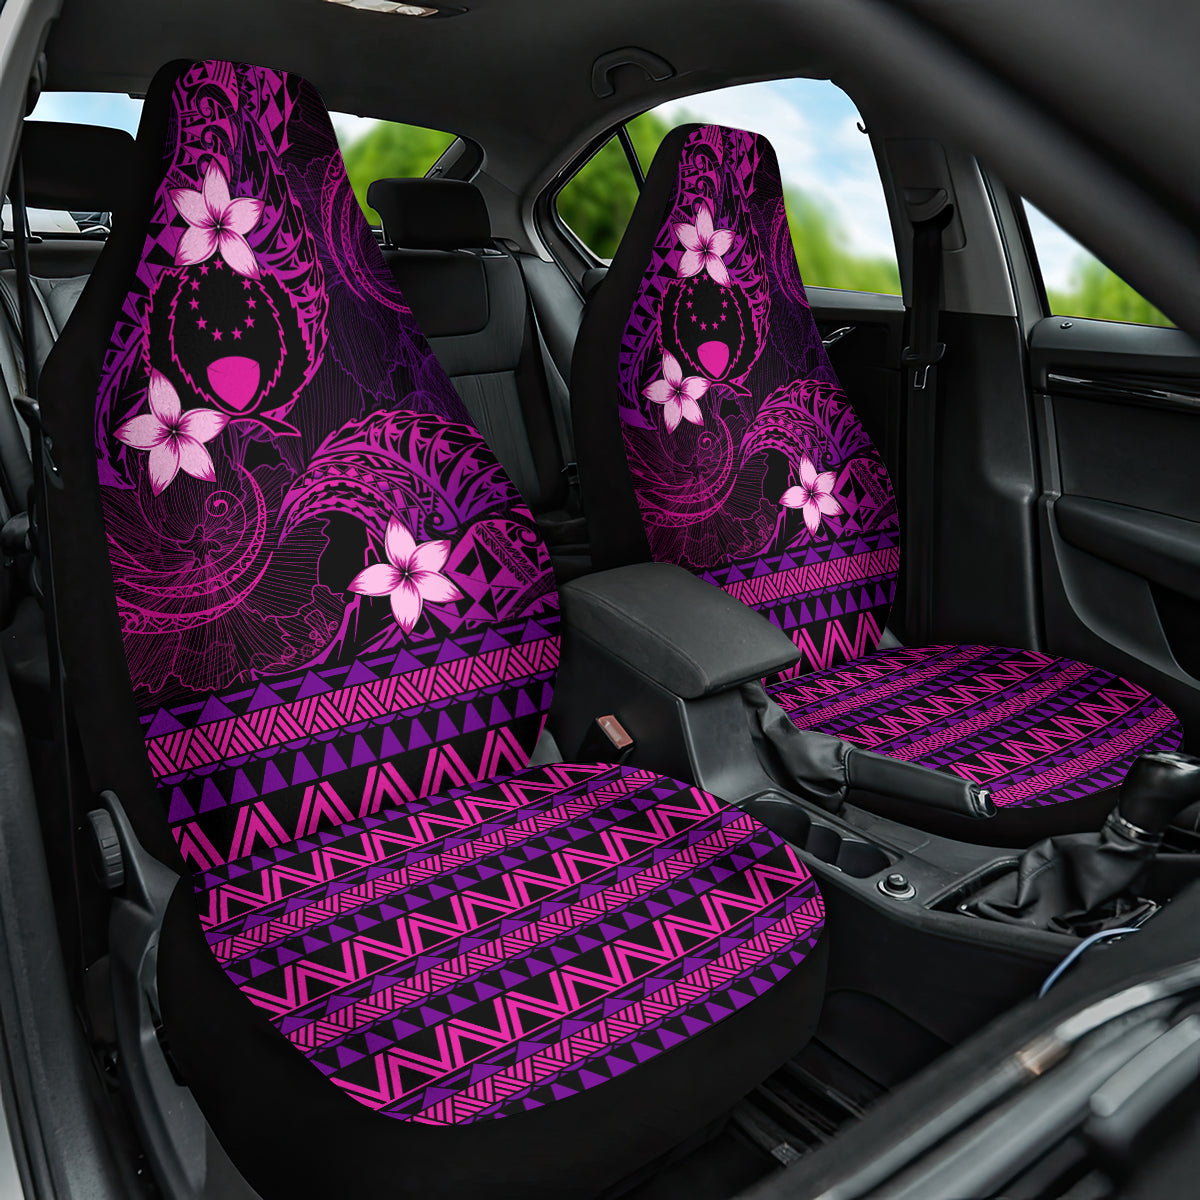 FSM Pohnpei State Car Seat Cover Tribal Pattern Pink Version LT01 One Size Pink - Polynesian Pride